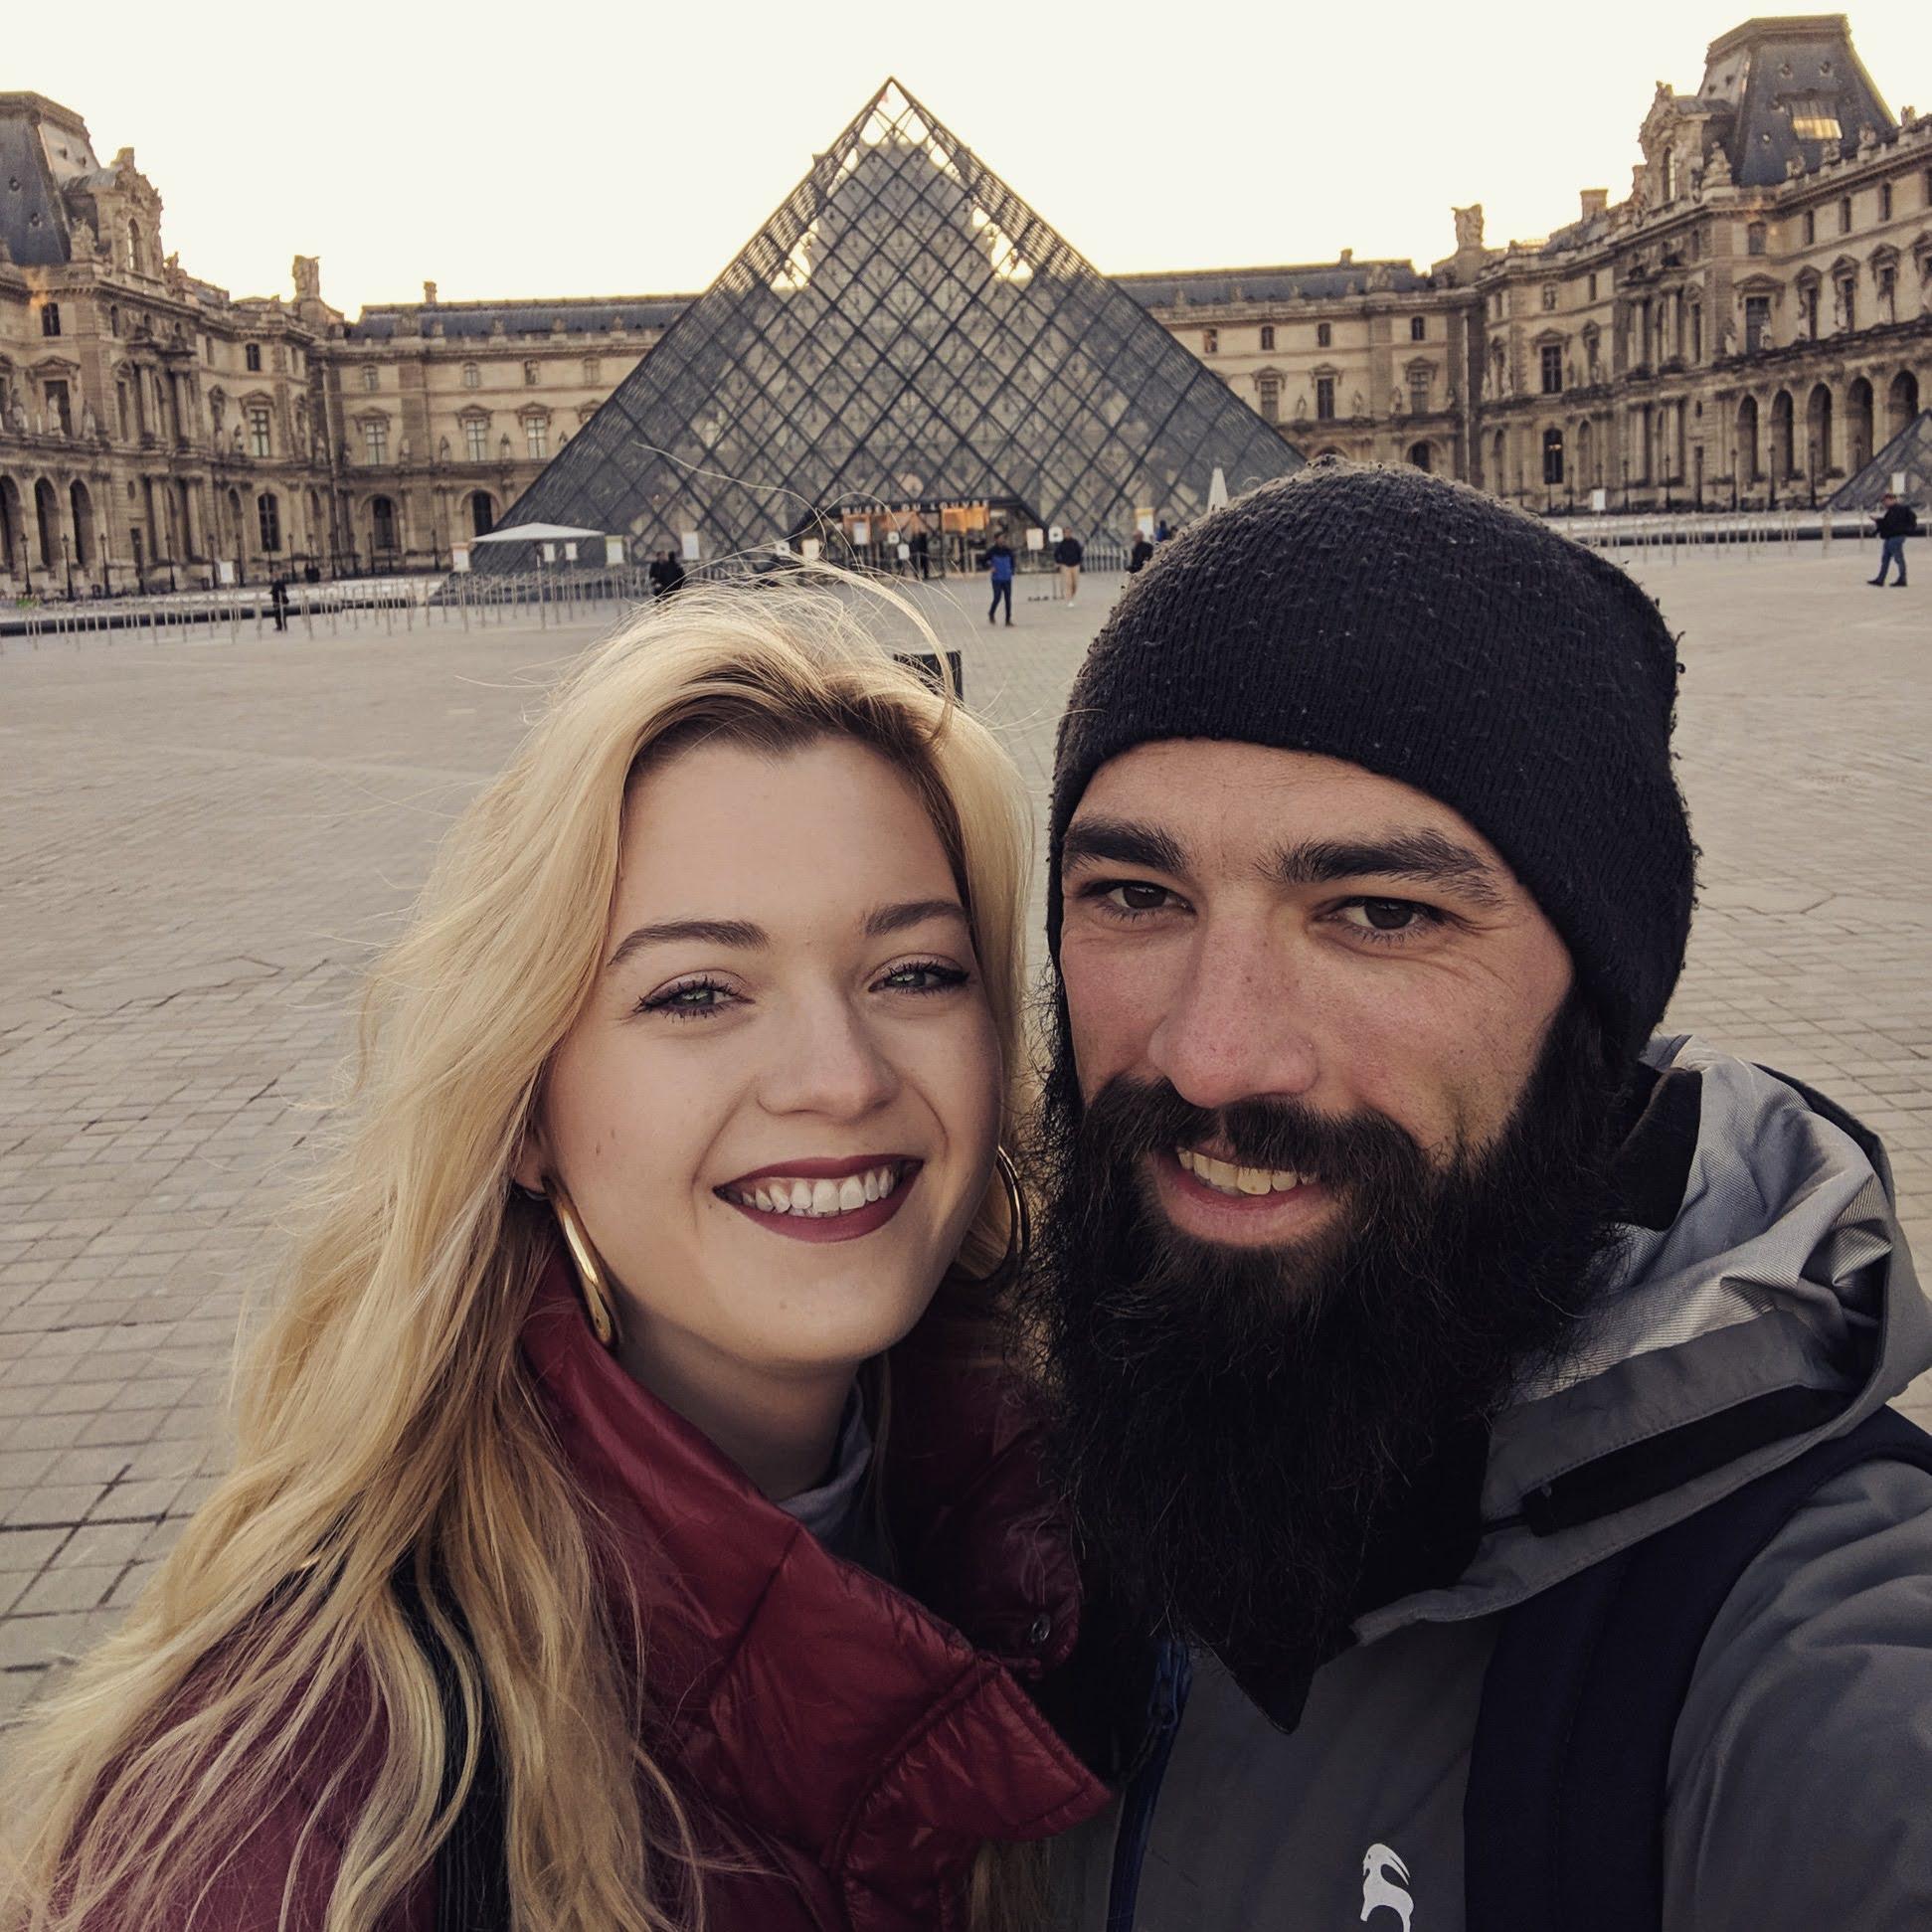 Visiting the Louvre in Paris. The couple spent 4 weeks traveling through Europe together in February of 2019.